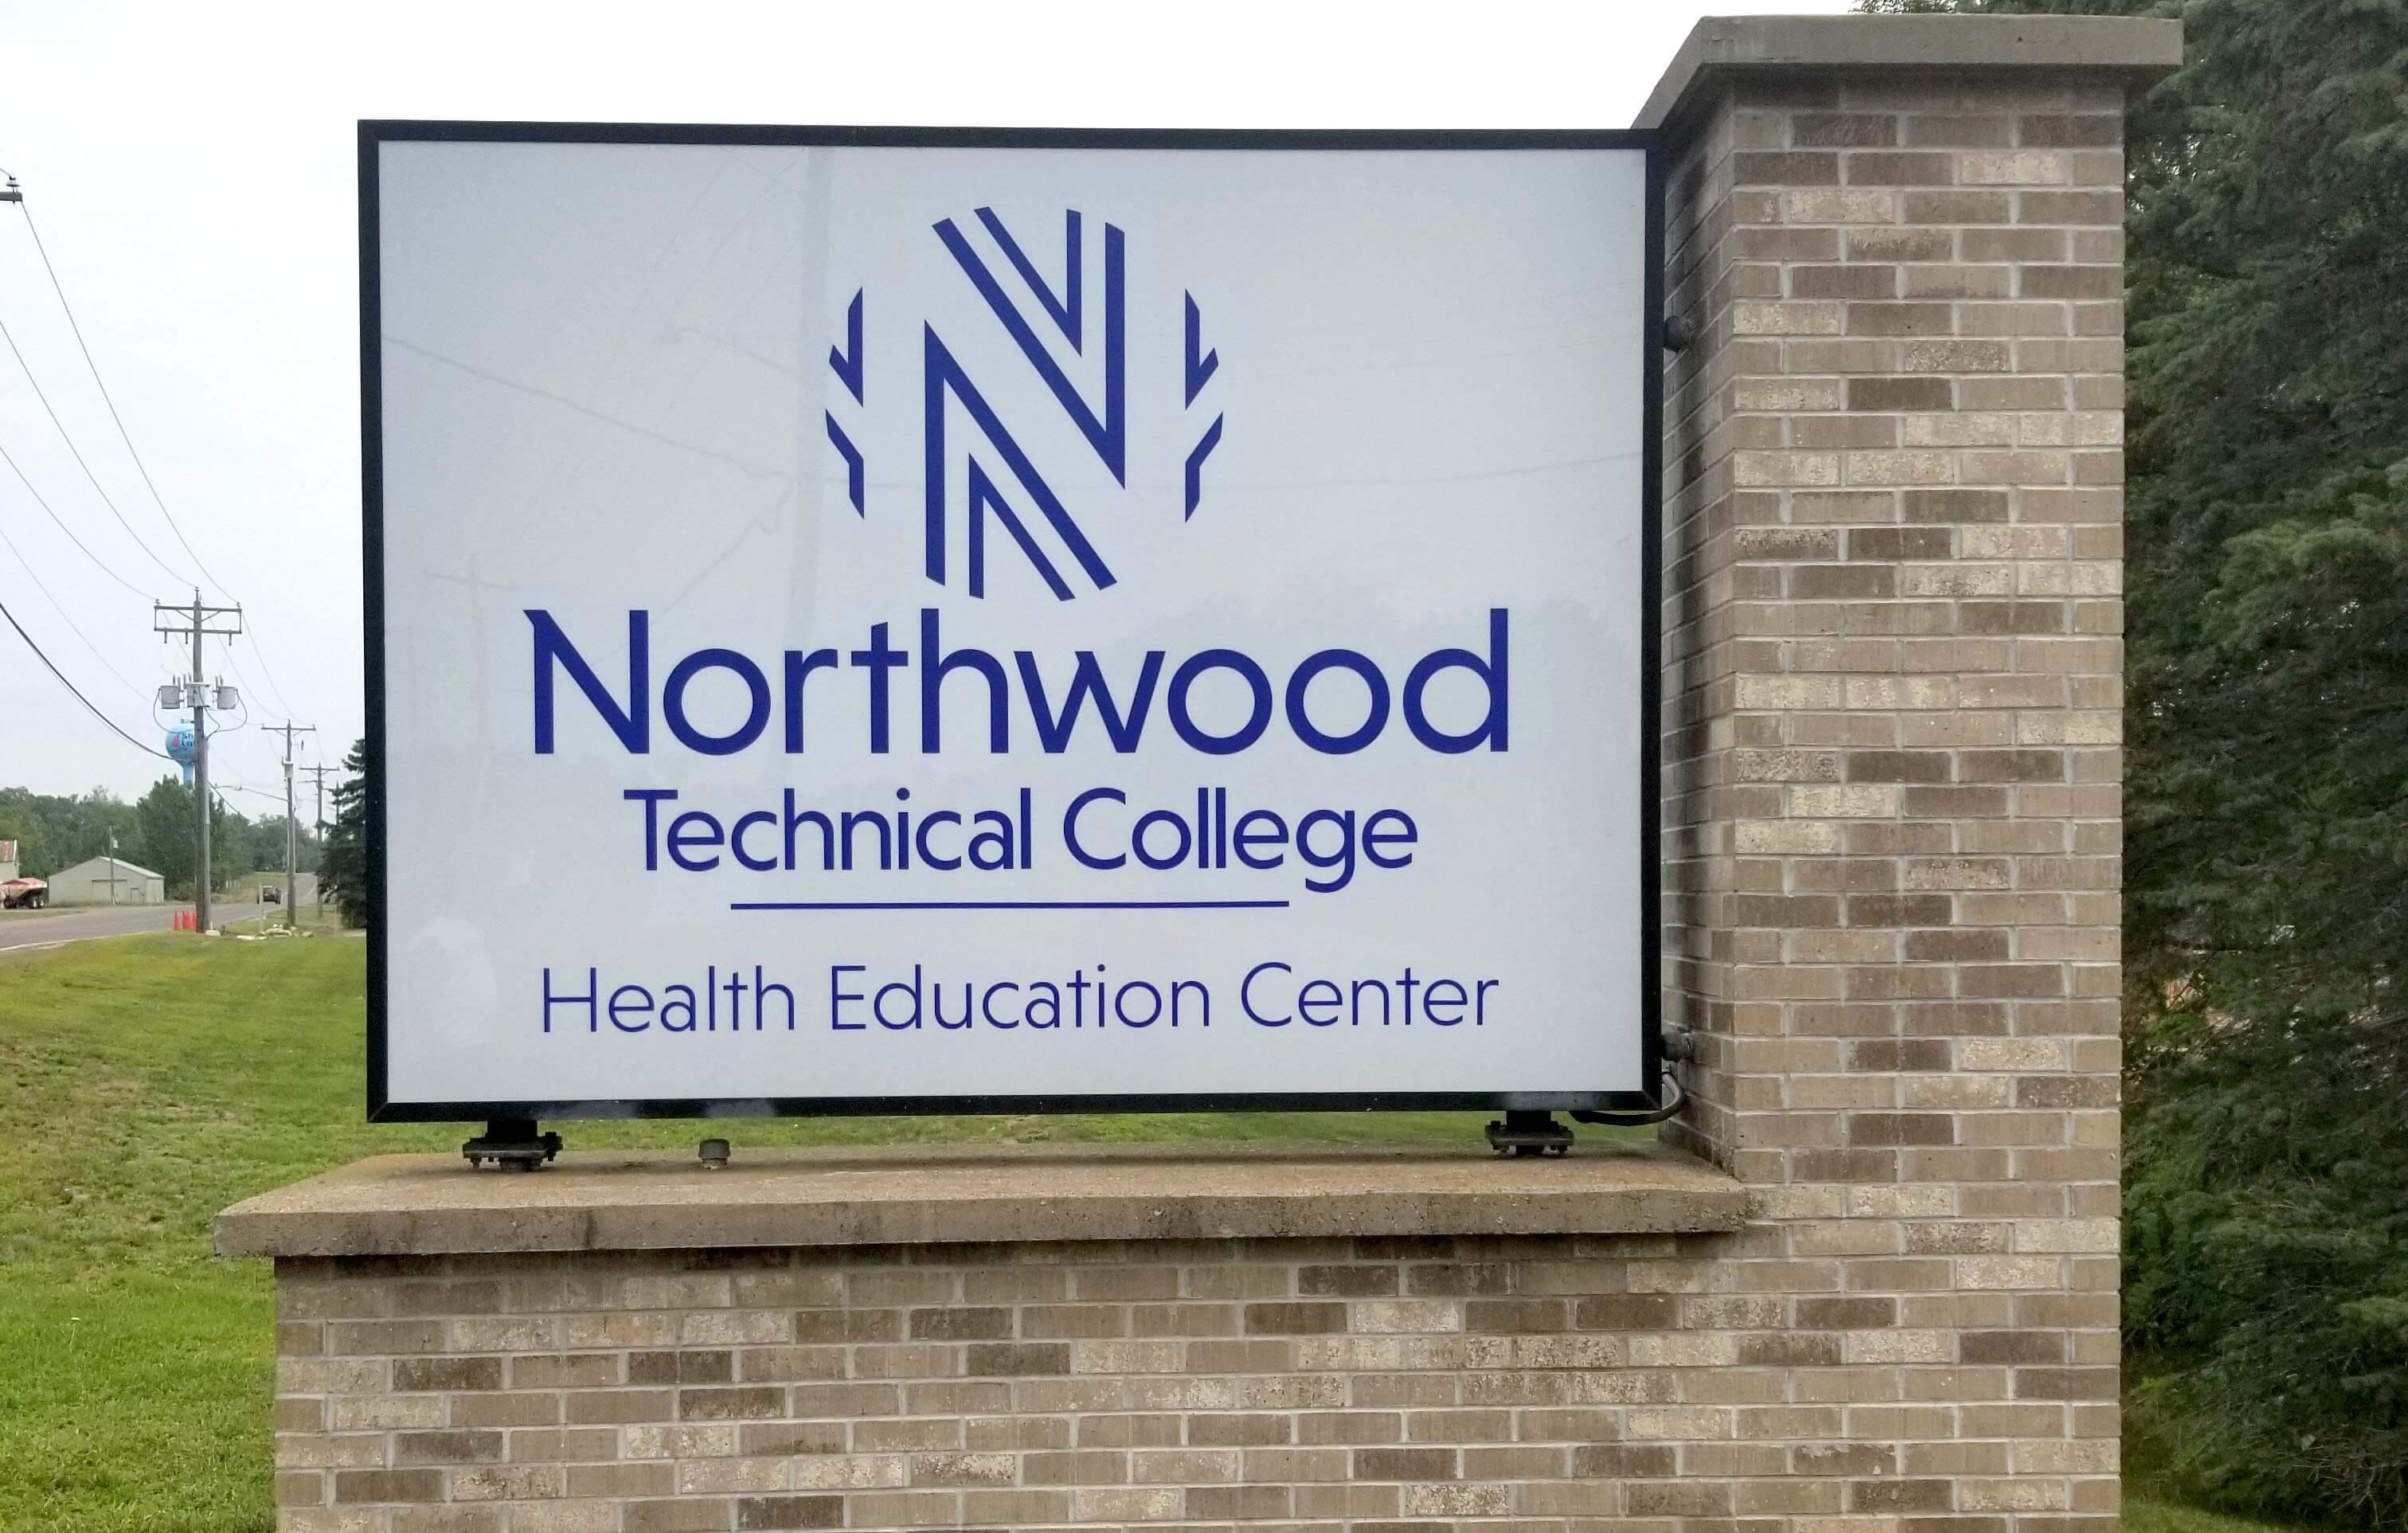 Signage that says Northwood Technical College Health Education Center